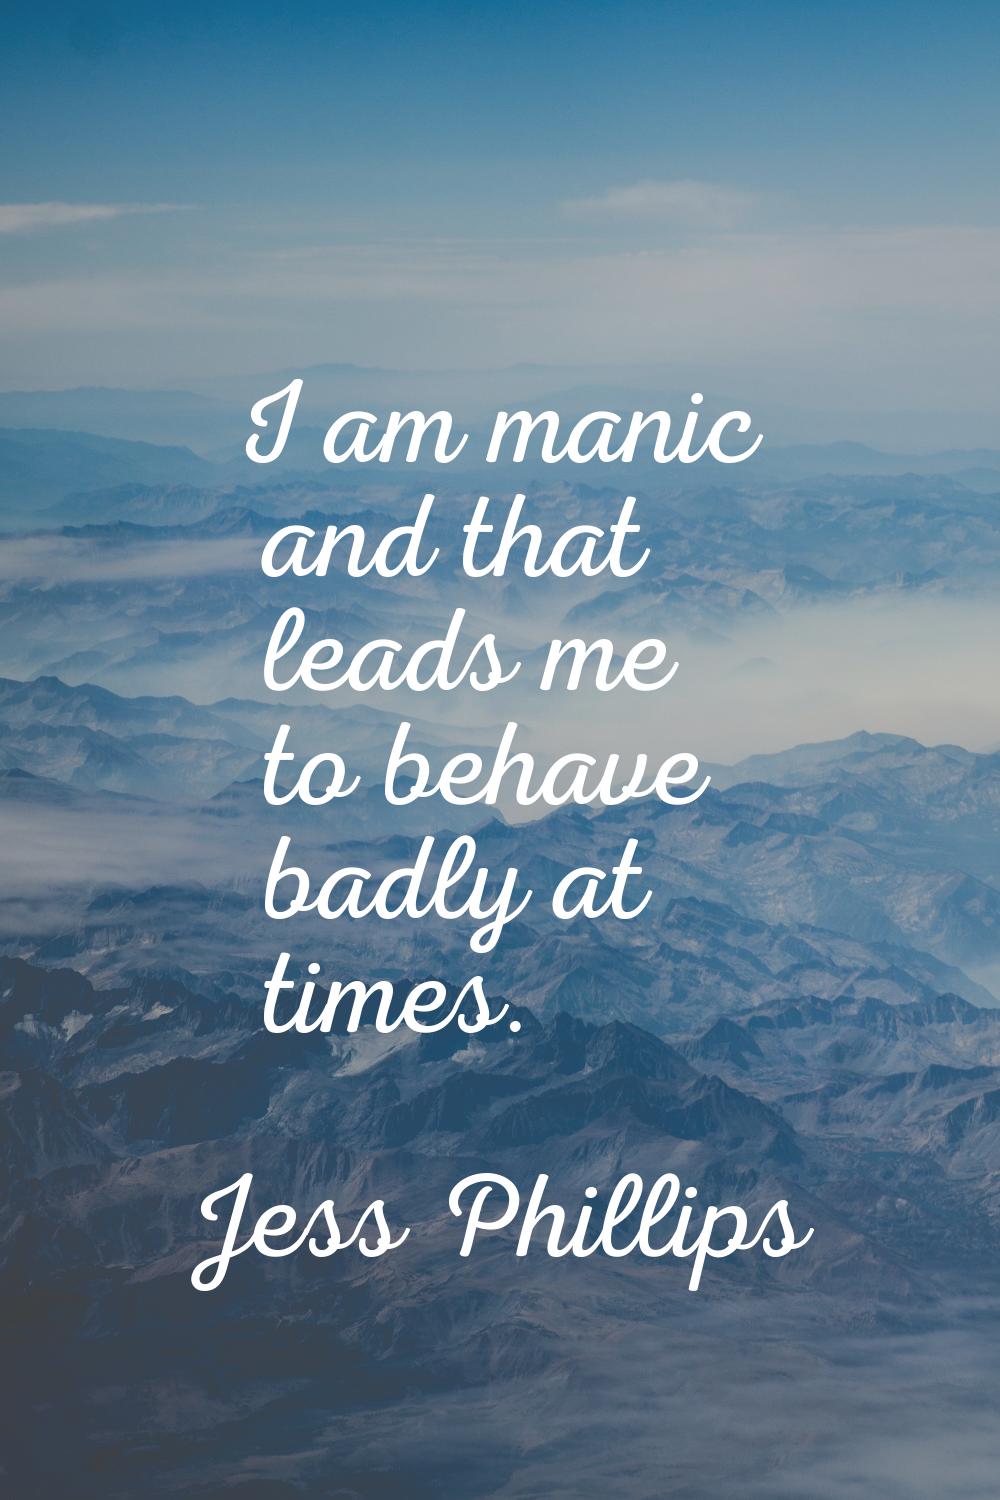 I am manic and that leads me to behave badly at times.